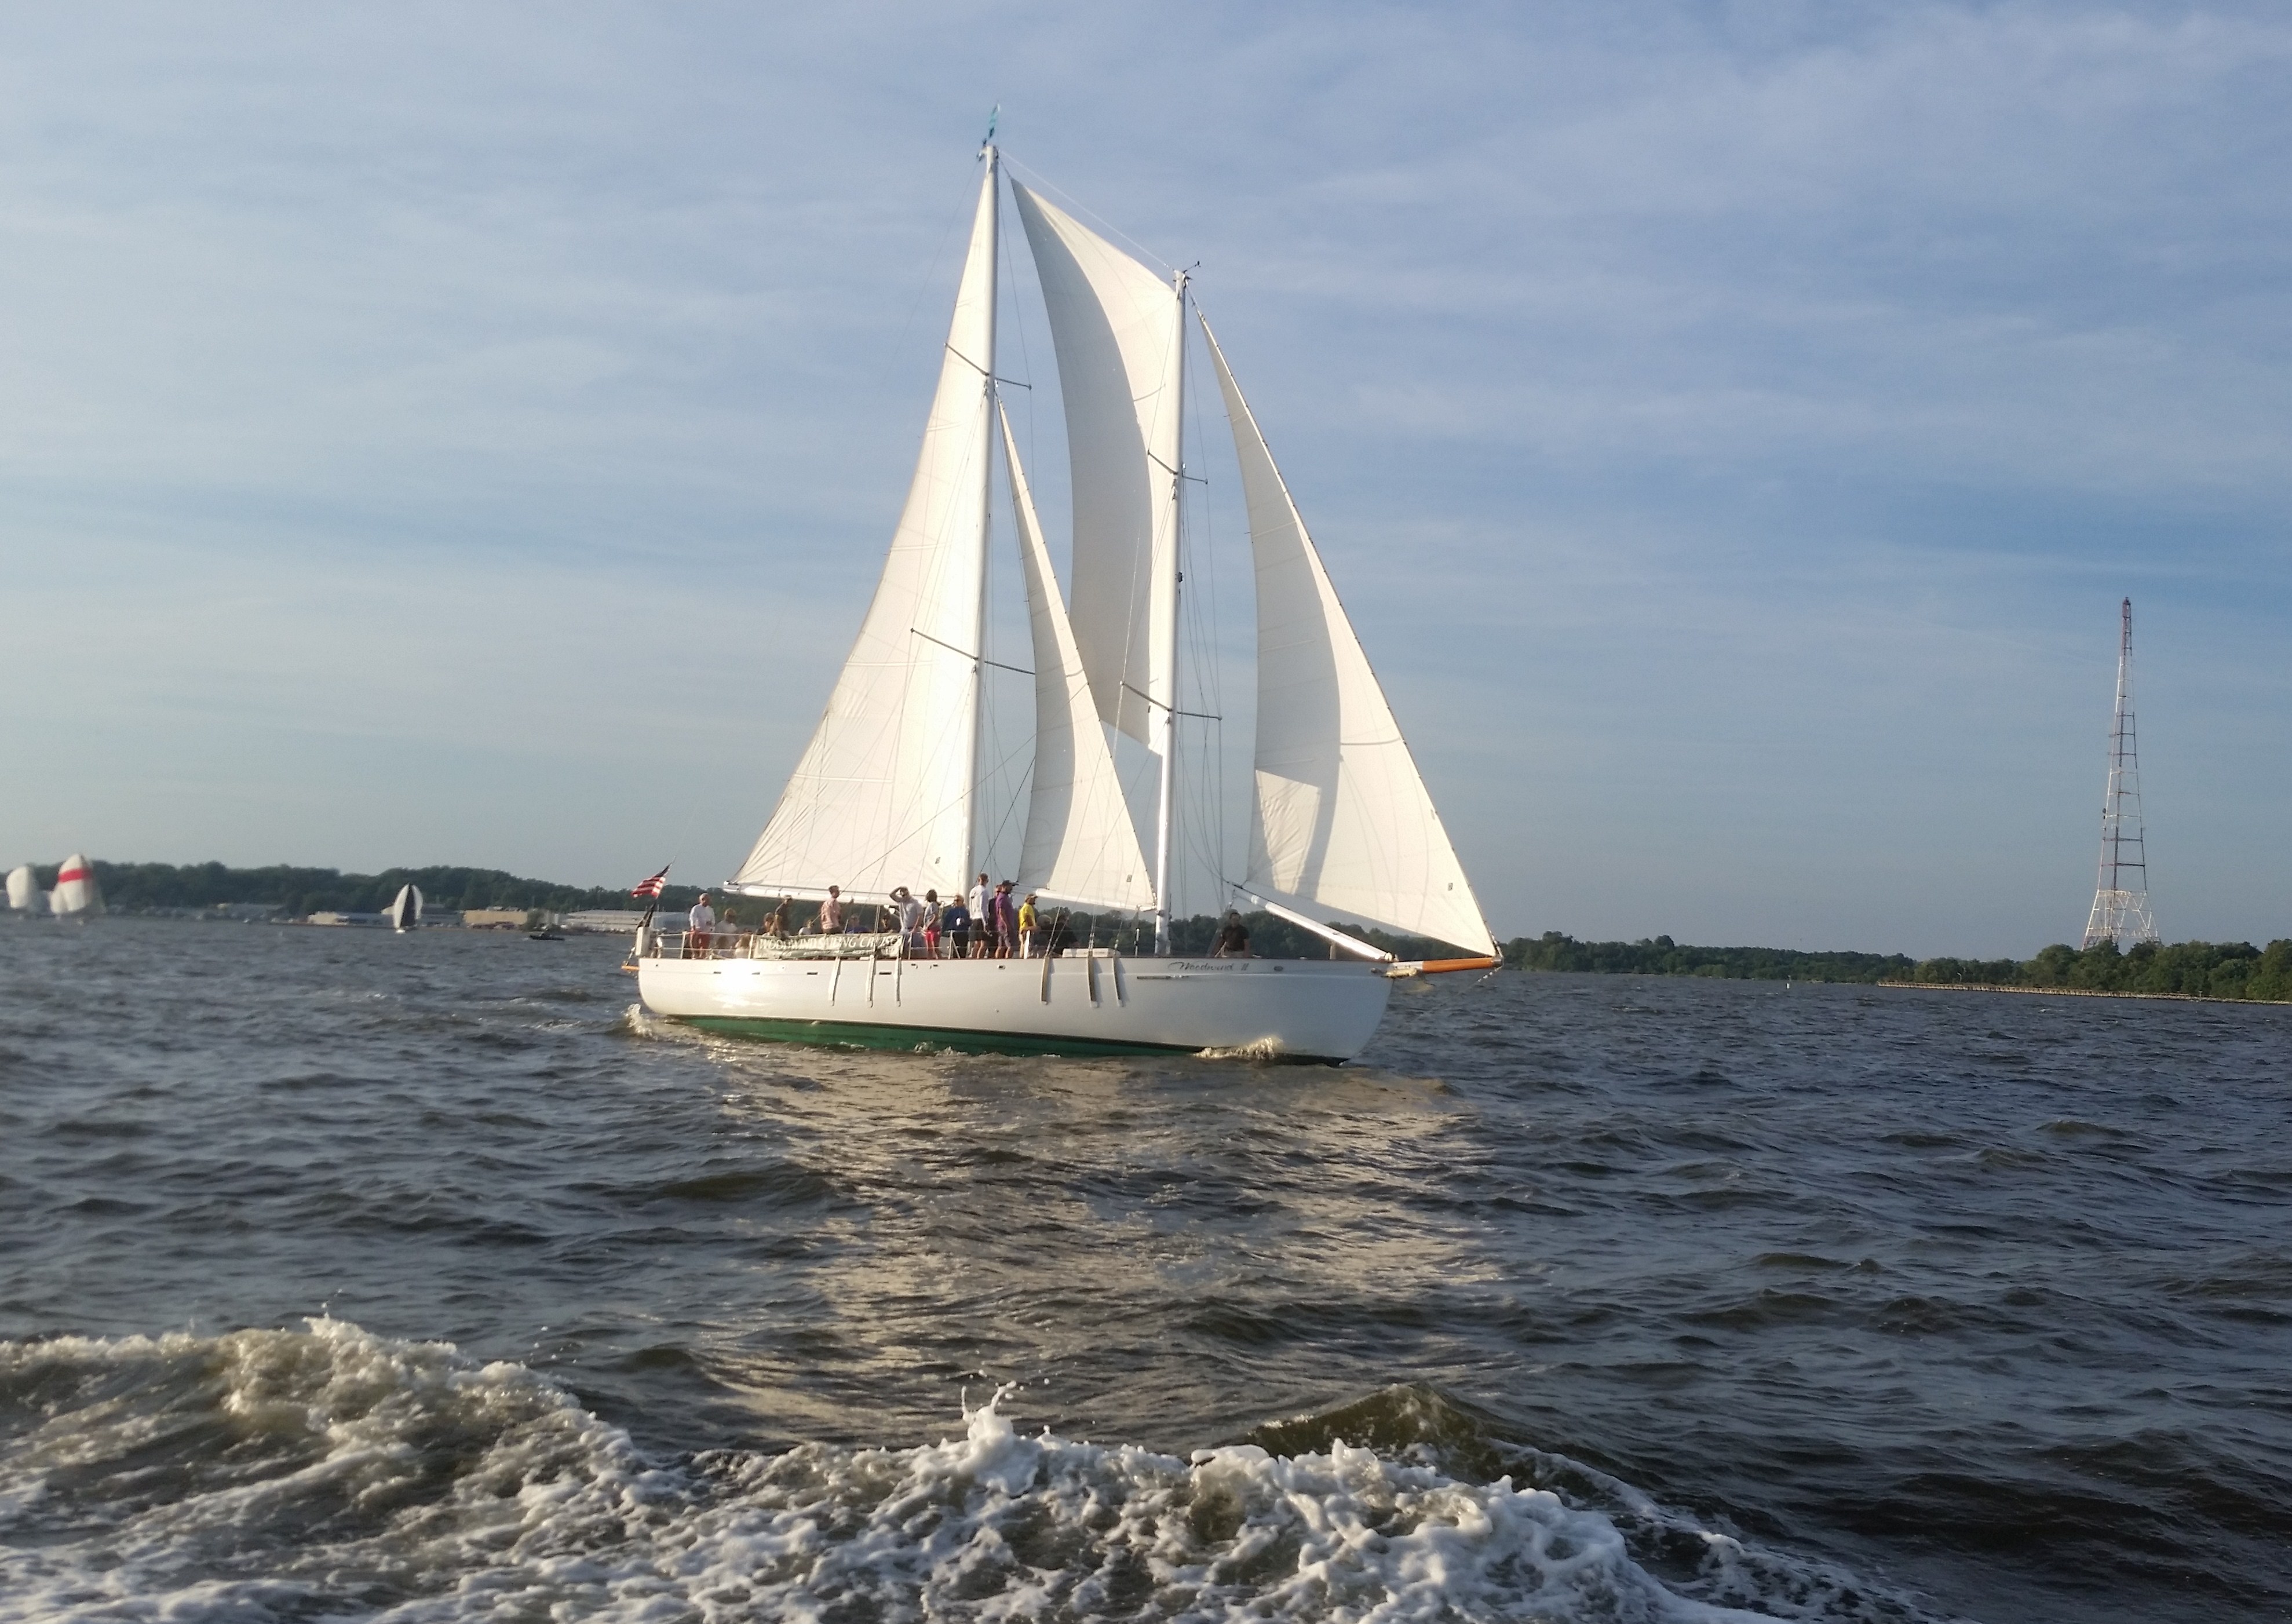 White sails full of wind on as the schooner flies over the water